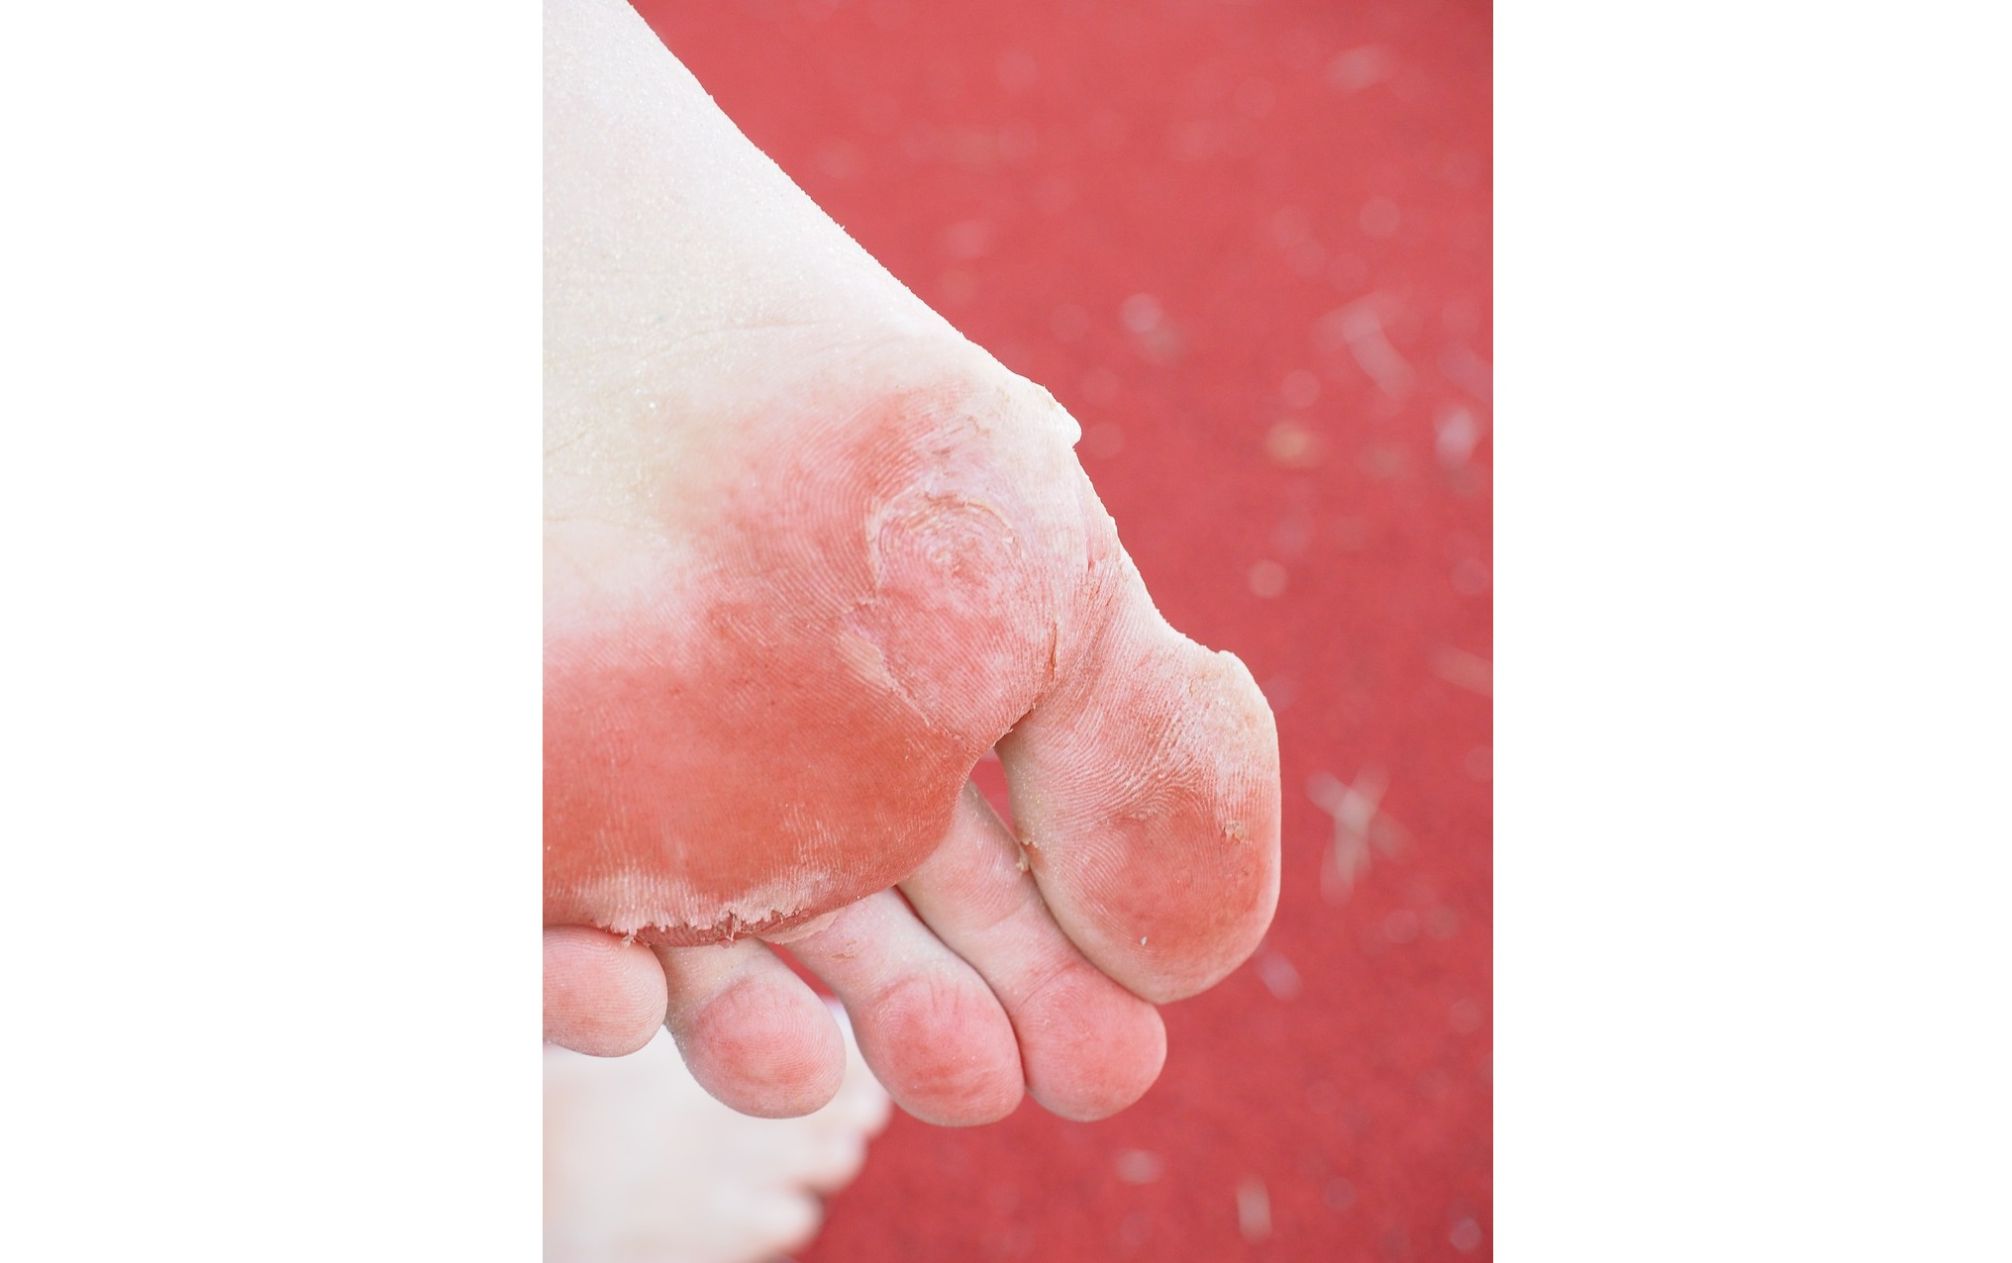 18 Inexpensive and Natural Home Remedies for Athlete’s Foot